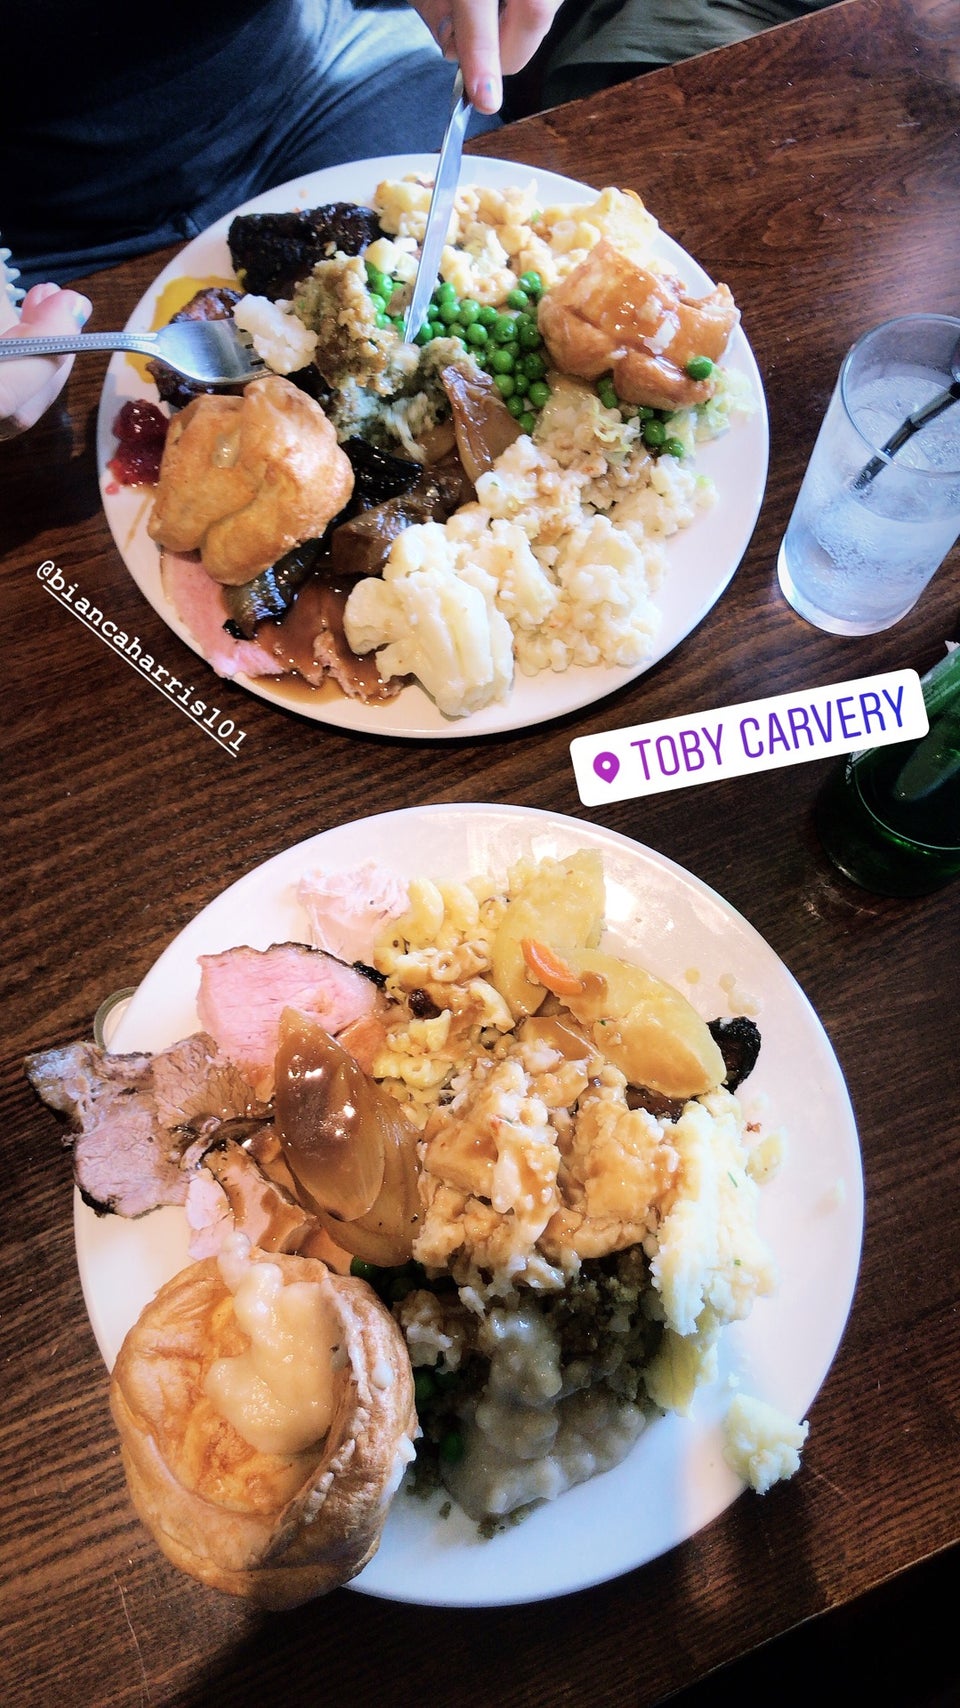 Toby Carvery Enfield